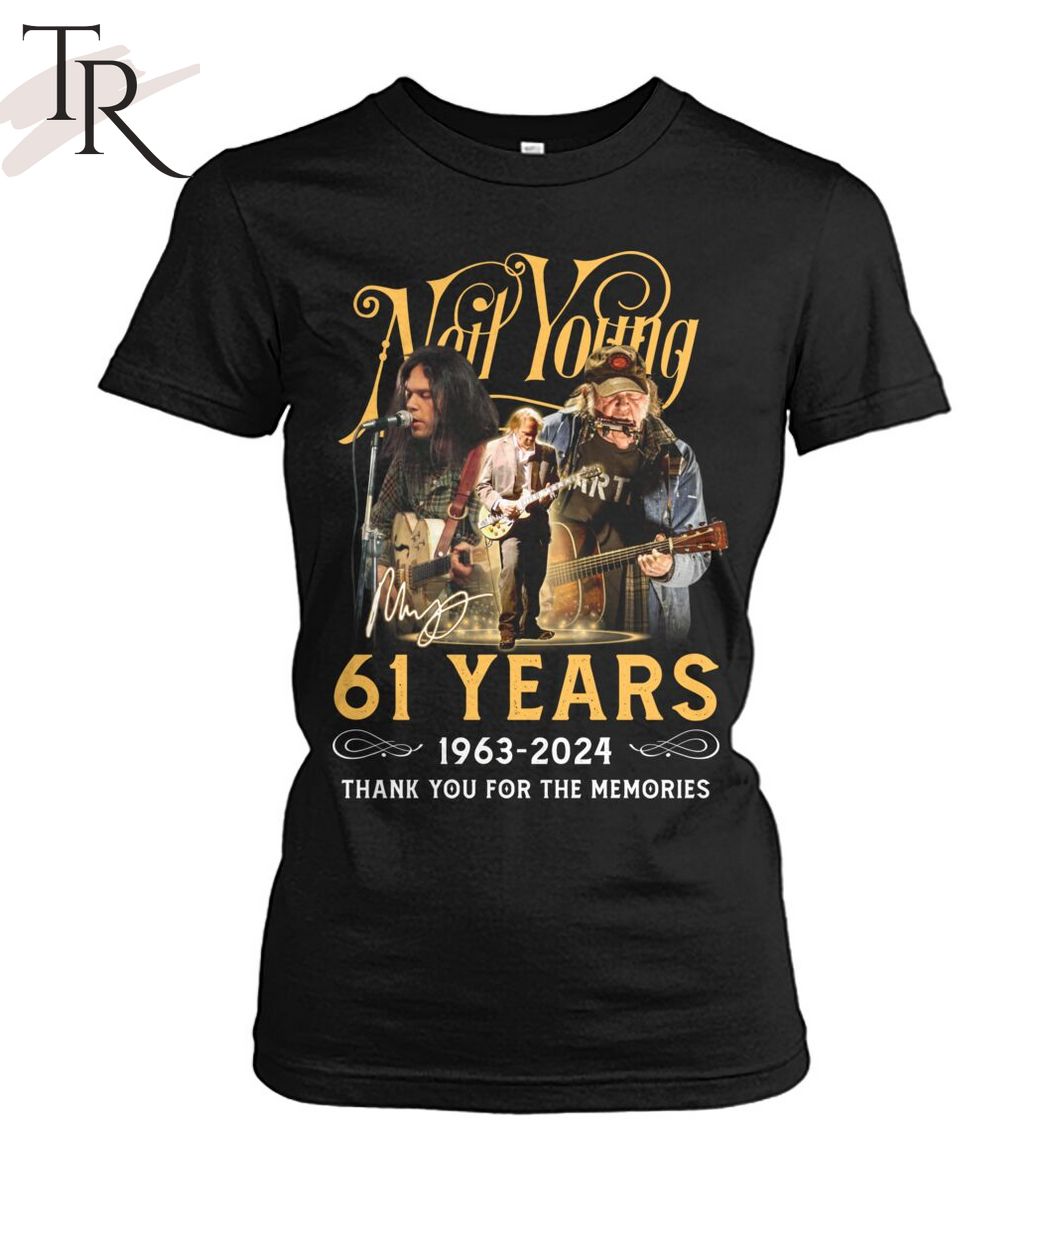 Neil Young 61 Years 1963-2024 Thank You For The Memories T-Shirt